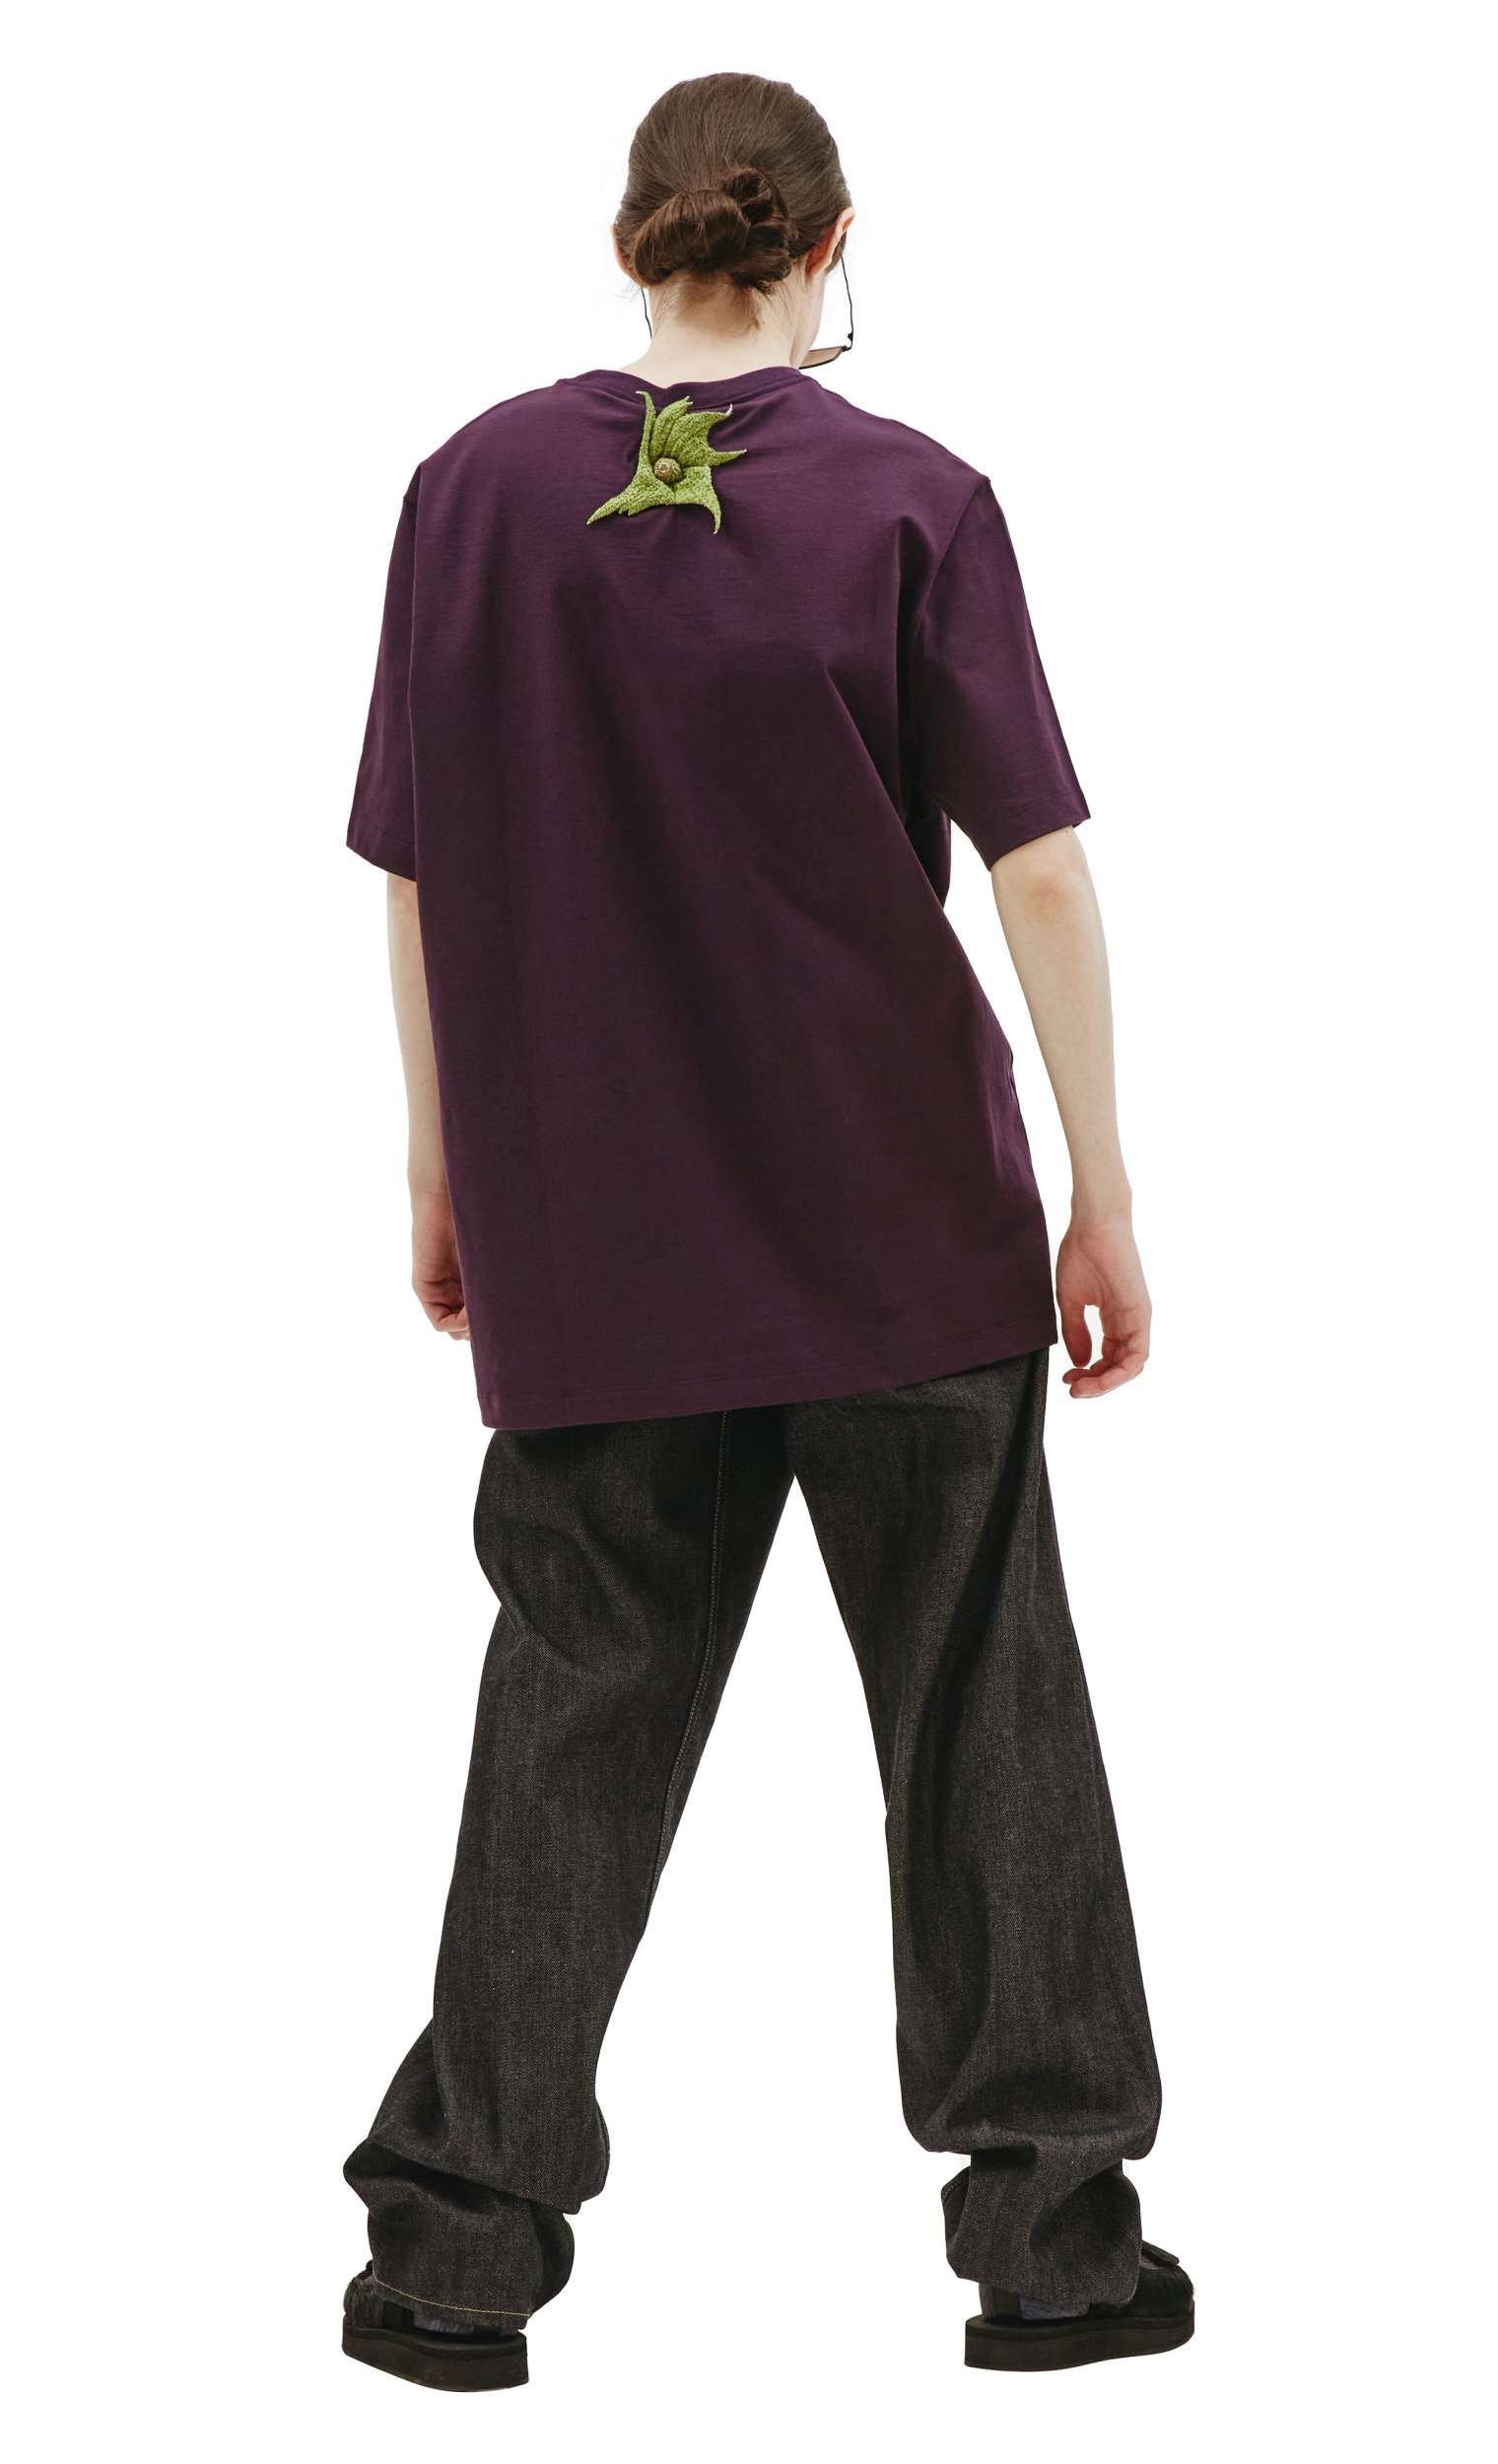 Doublet Embroidery eggplant t-shirt